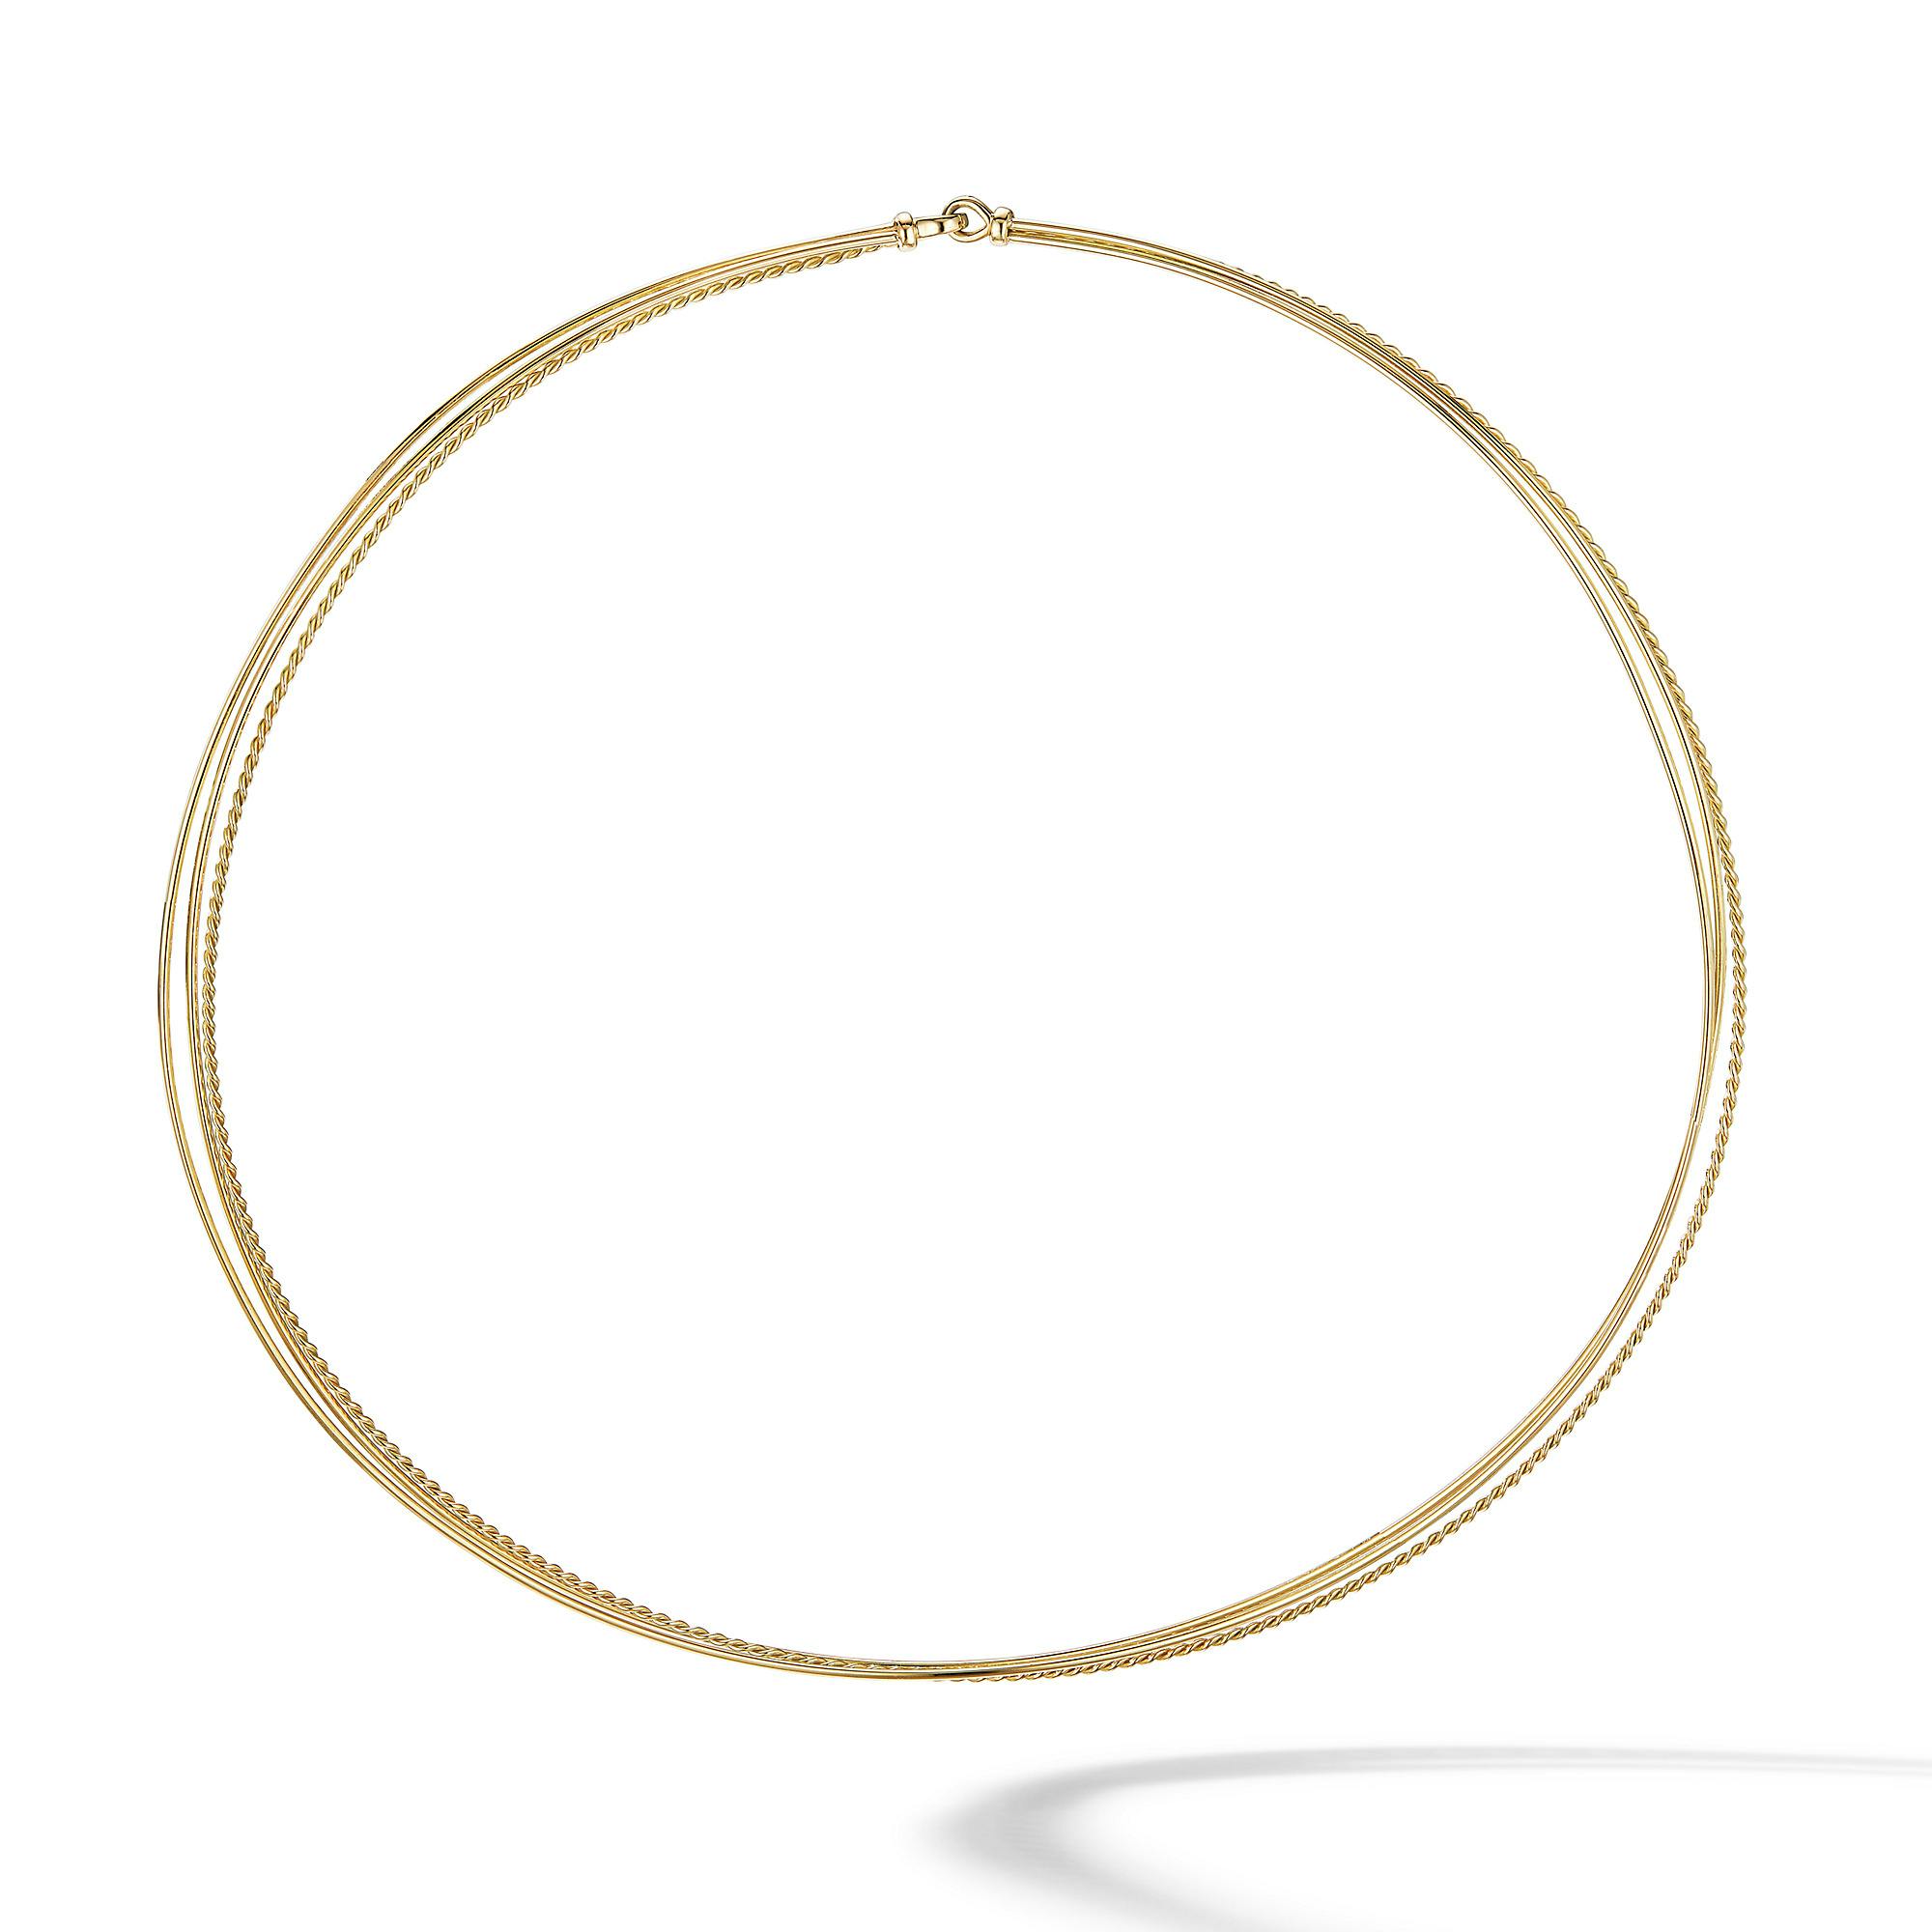 David Yurman DY Elements Three-Row Hard Wire Necklace in 18K Yellow Gold